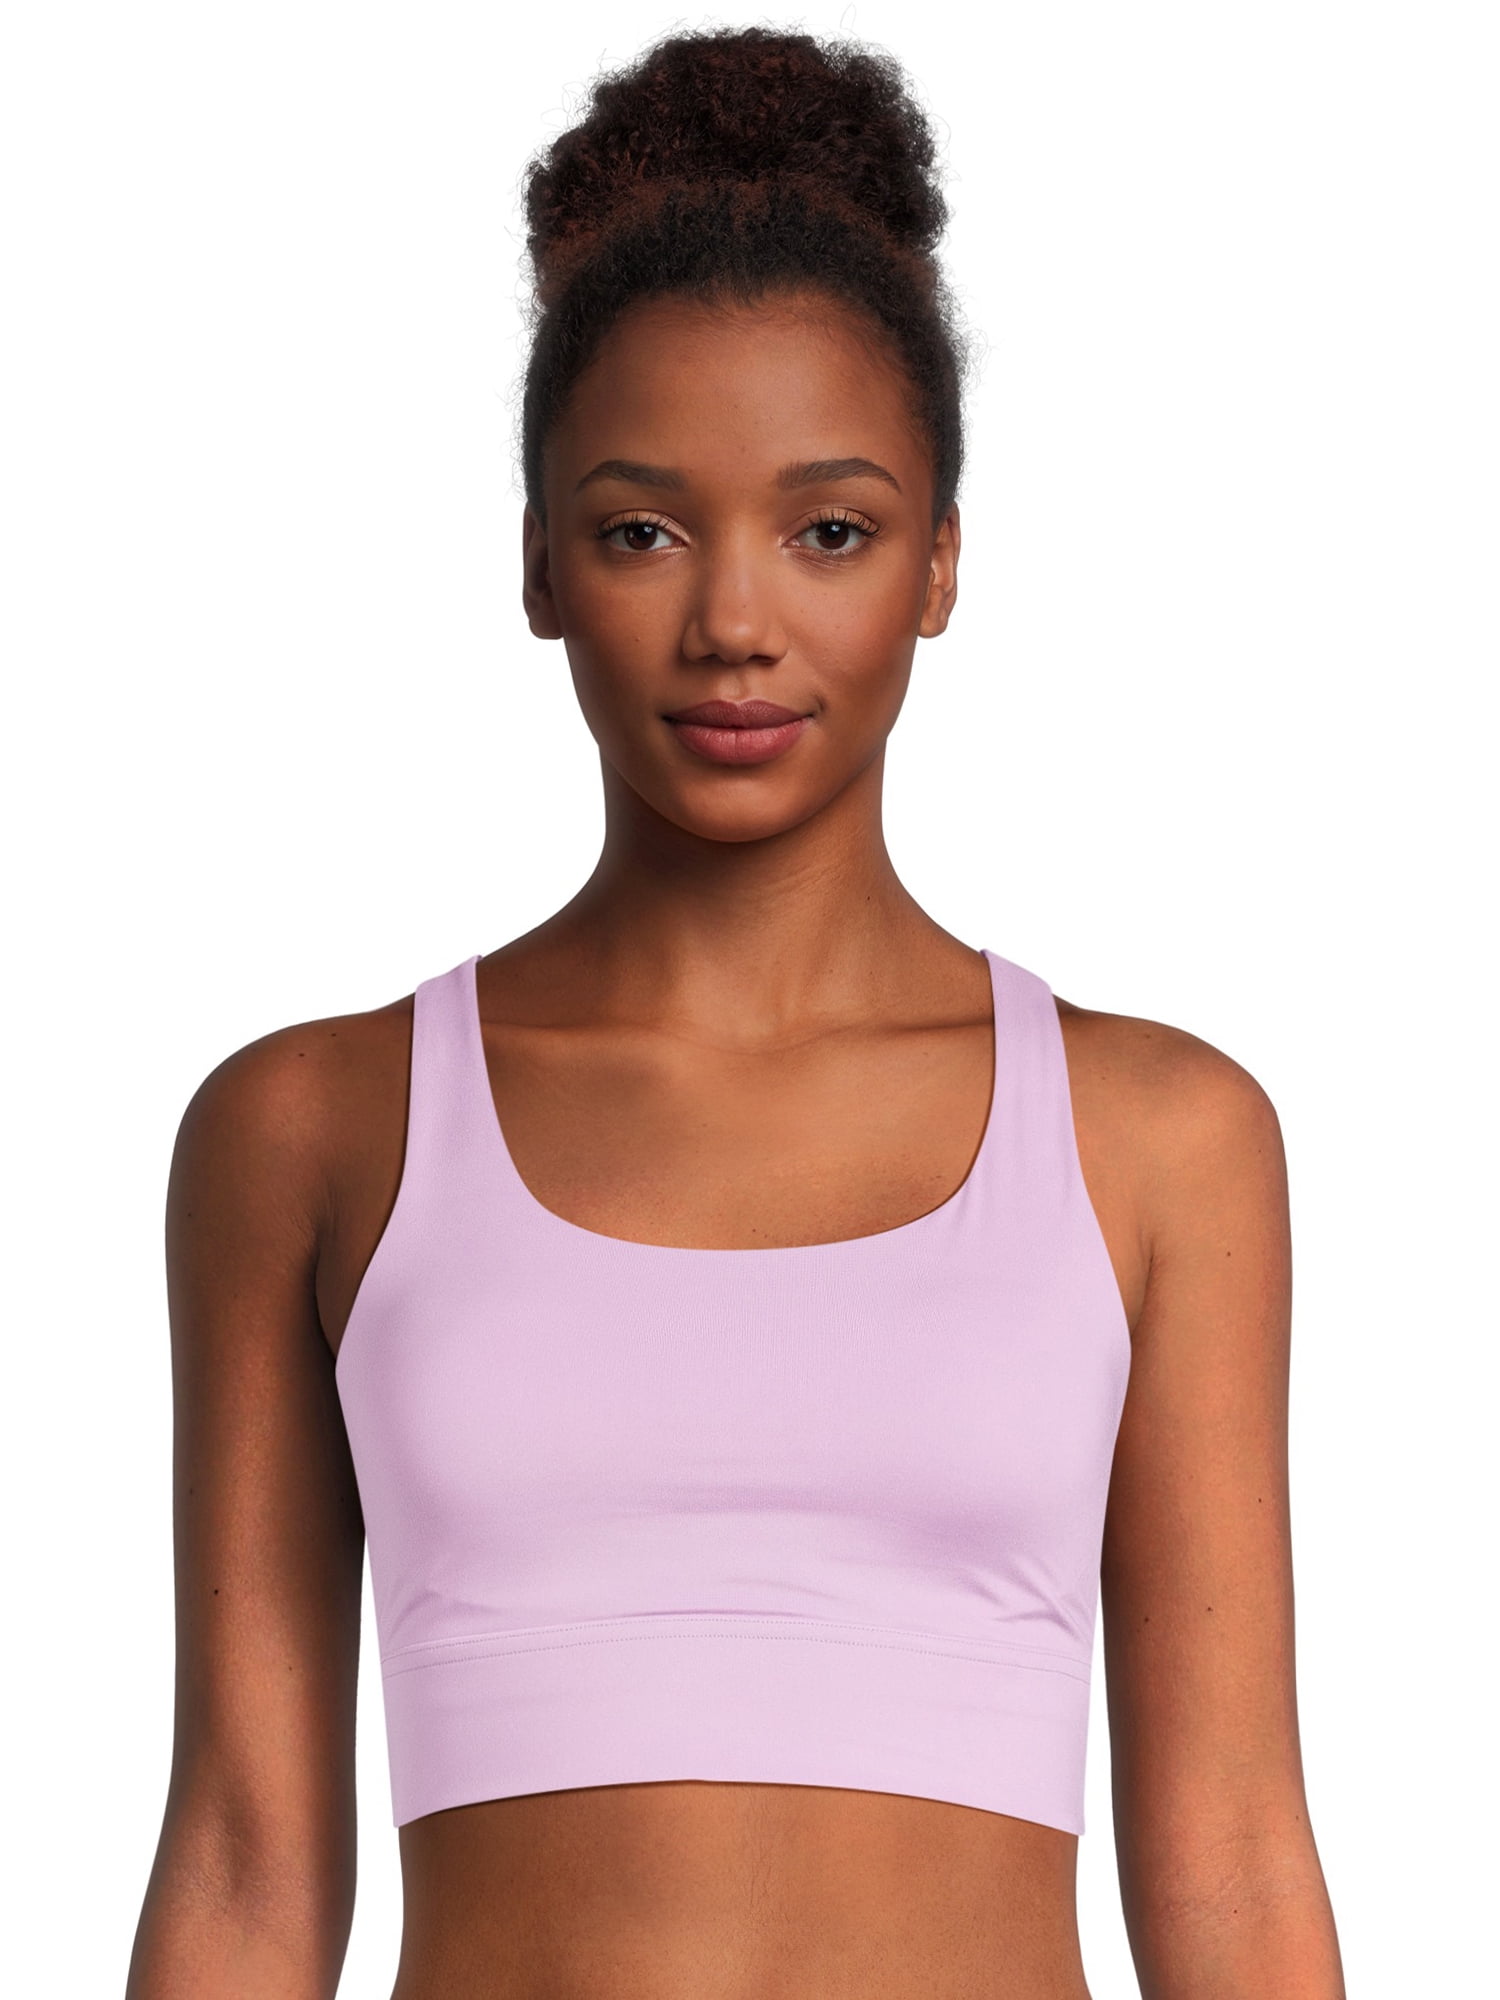 Avia Activewear Women's Molded Cup, High Support, Racerback